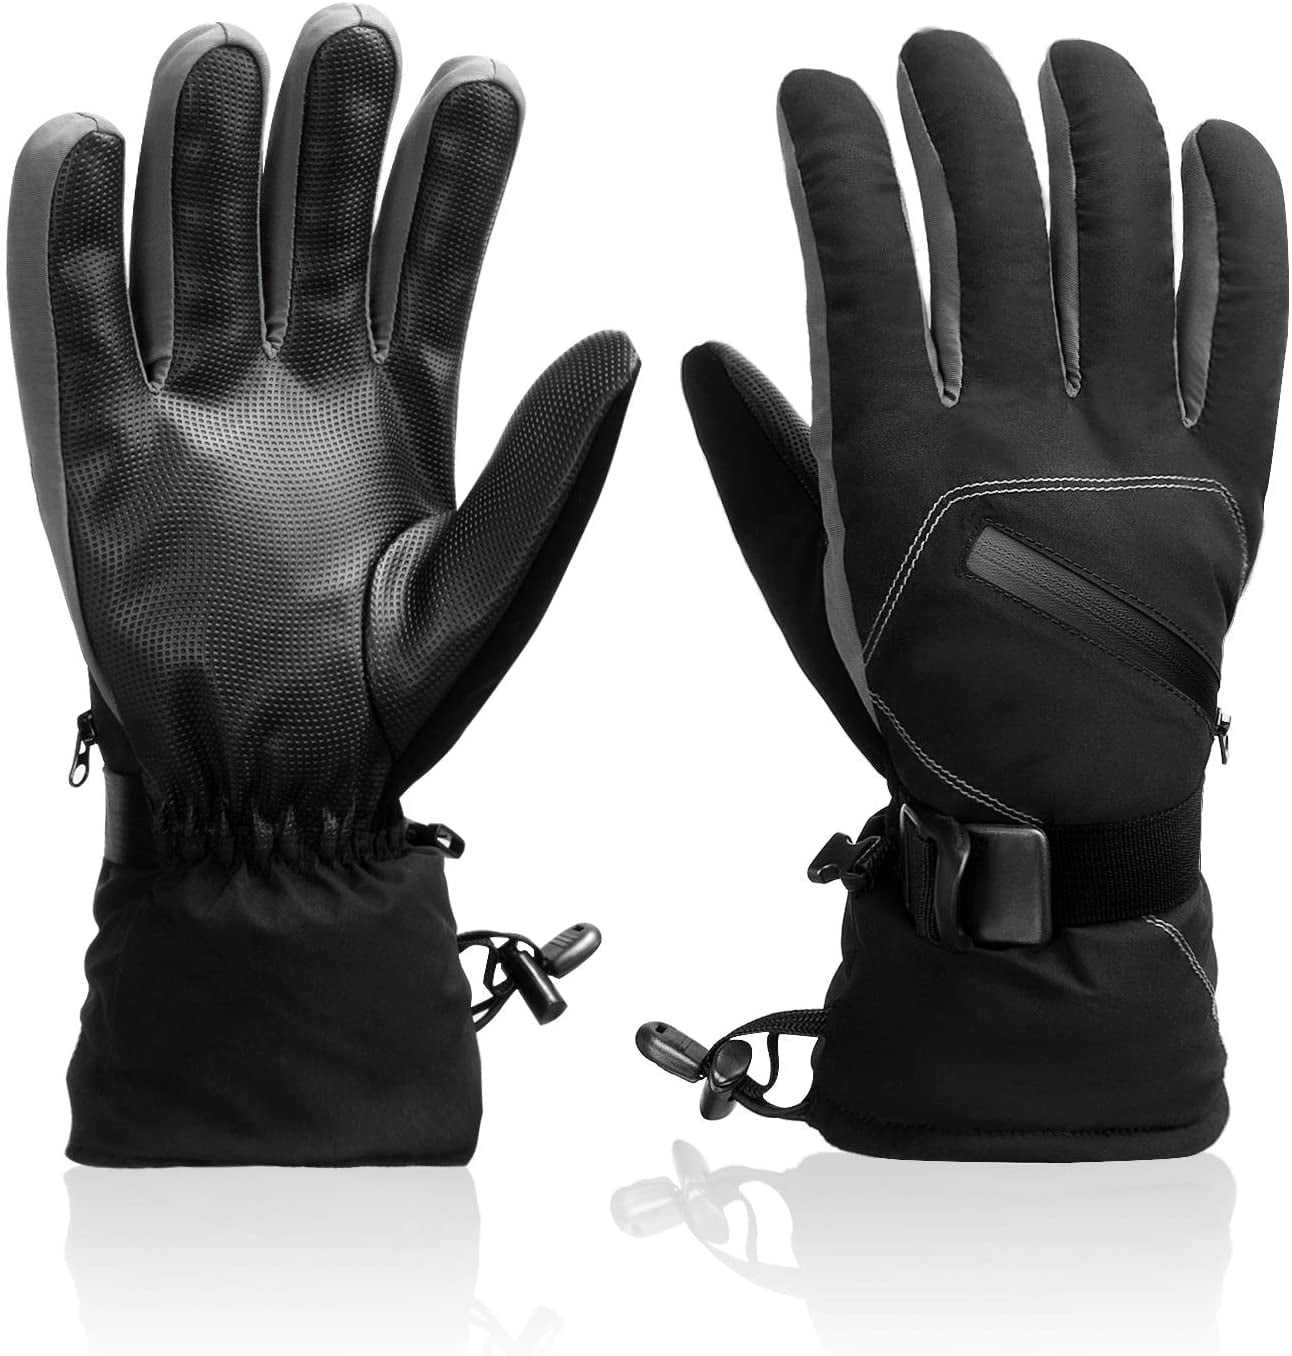 Waterproof & Windproof Winter Snowboard Gloves for Cold Weather Skiing & Snowboarding for Men & Women Ski & Snow Gloves 